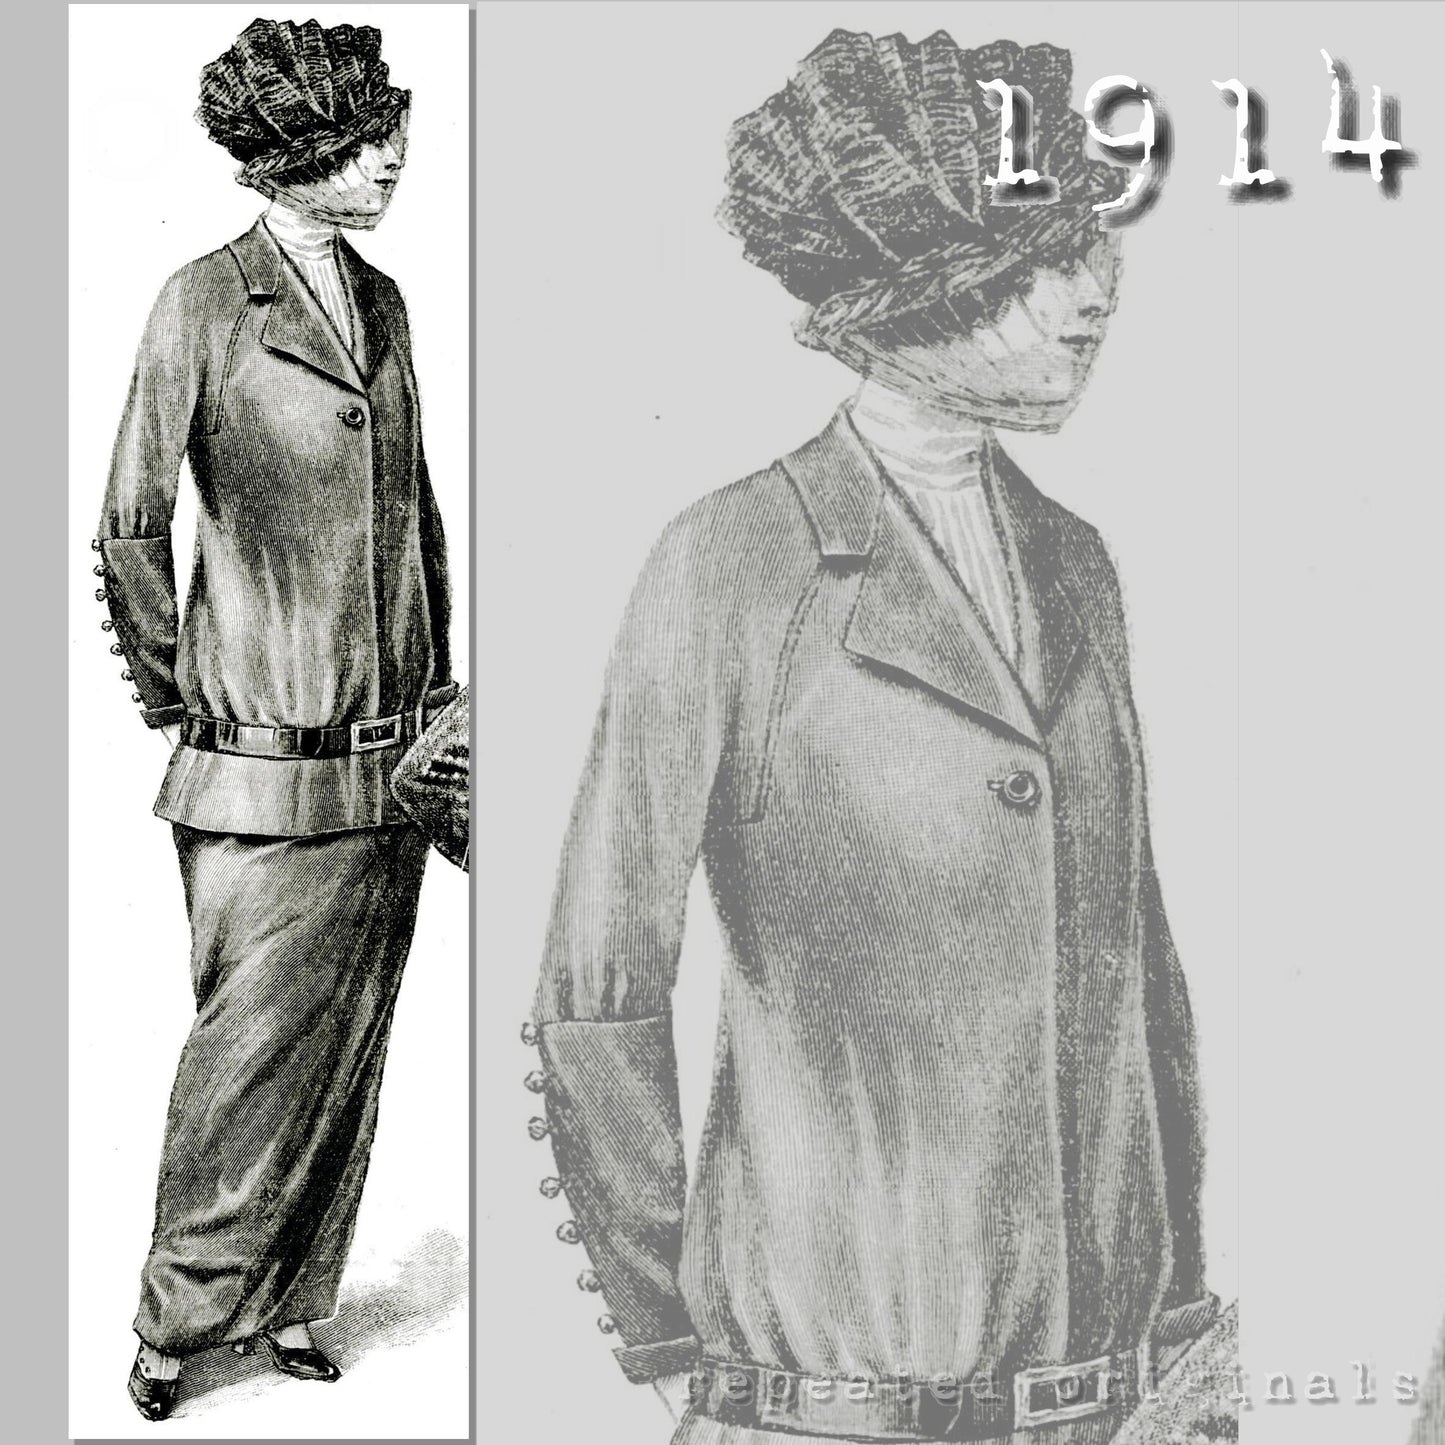 1914 Travelling Suit Sewing Pattern - INSTANT DOWNLOAD PDF